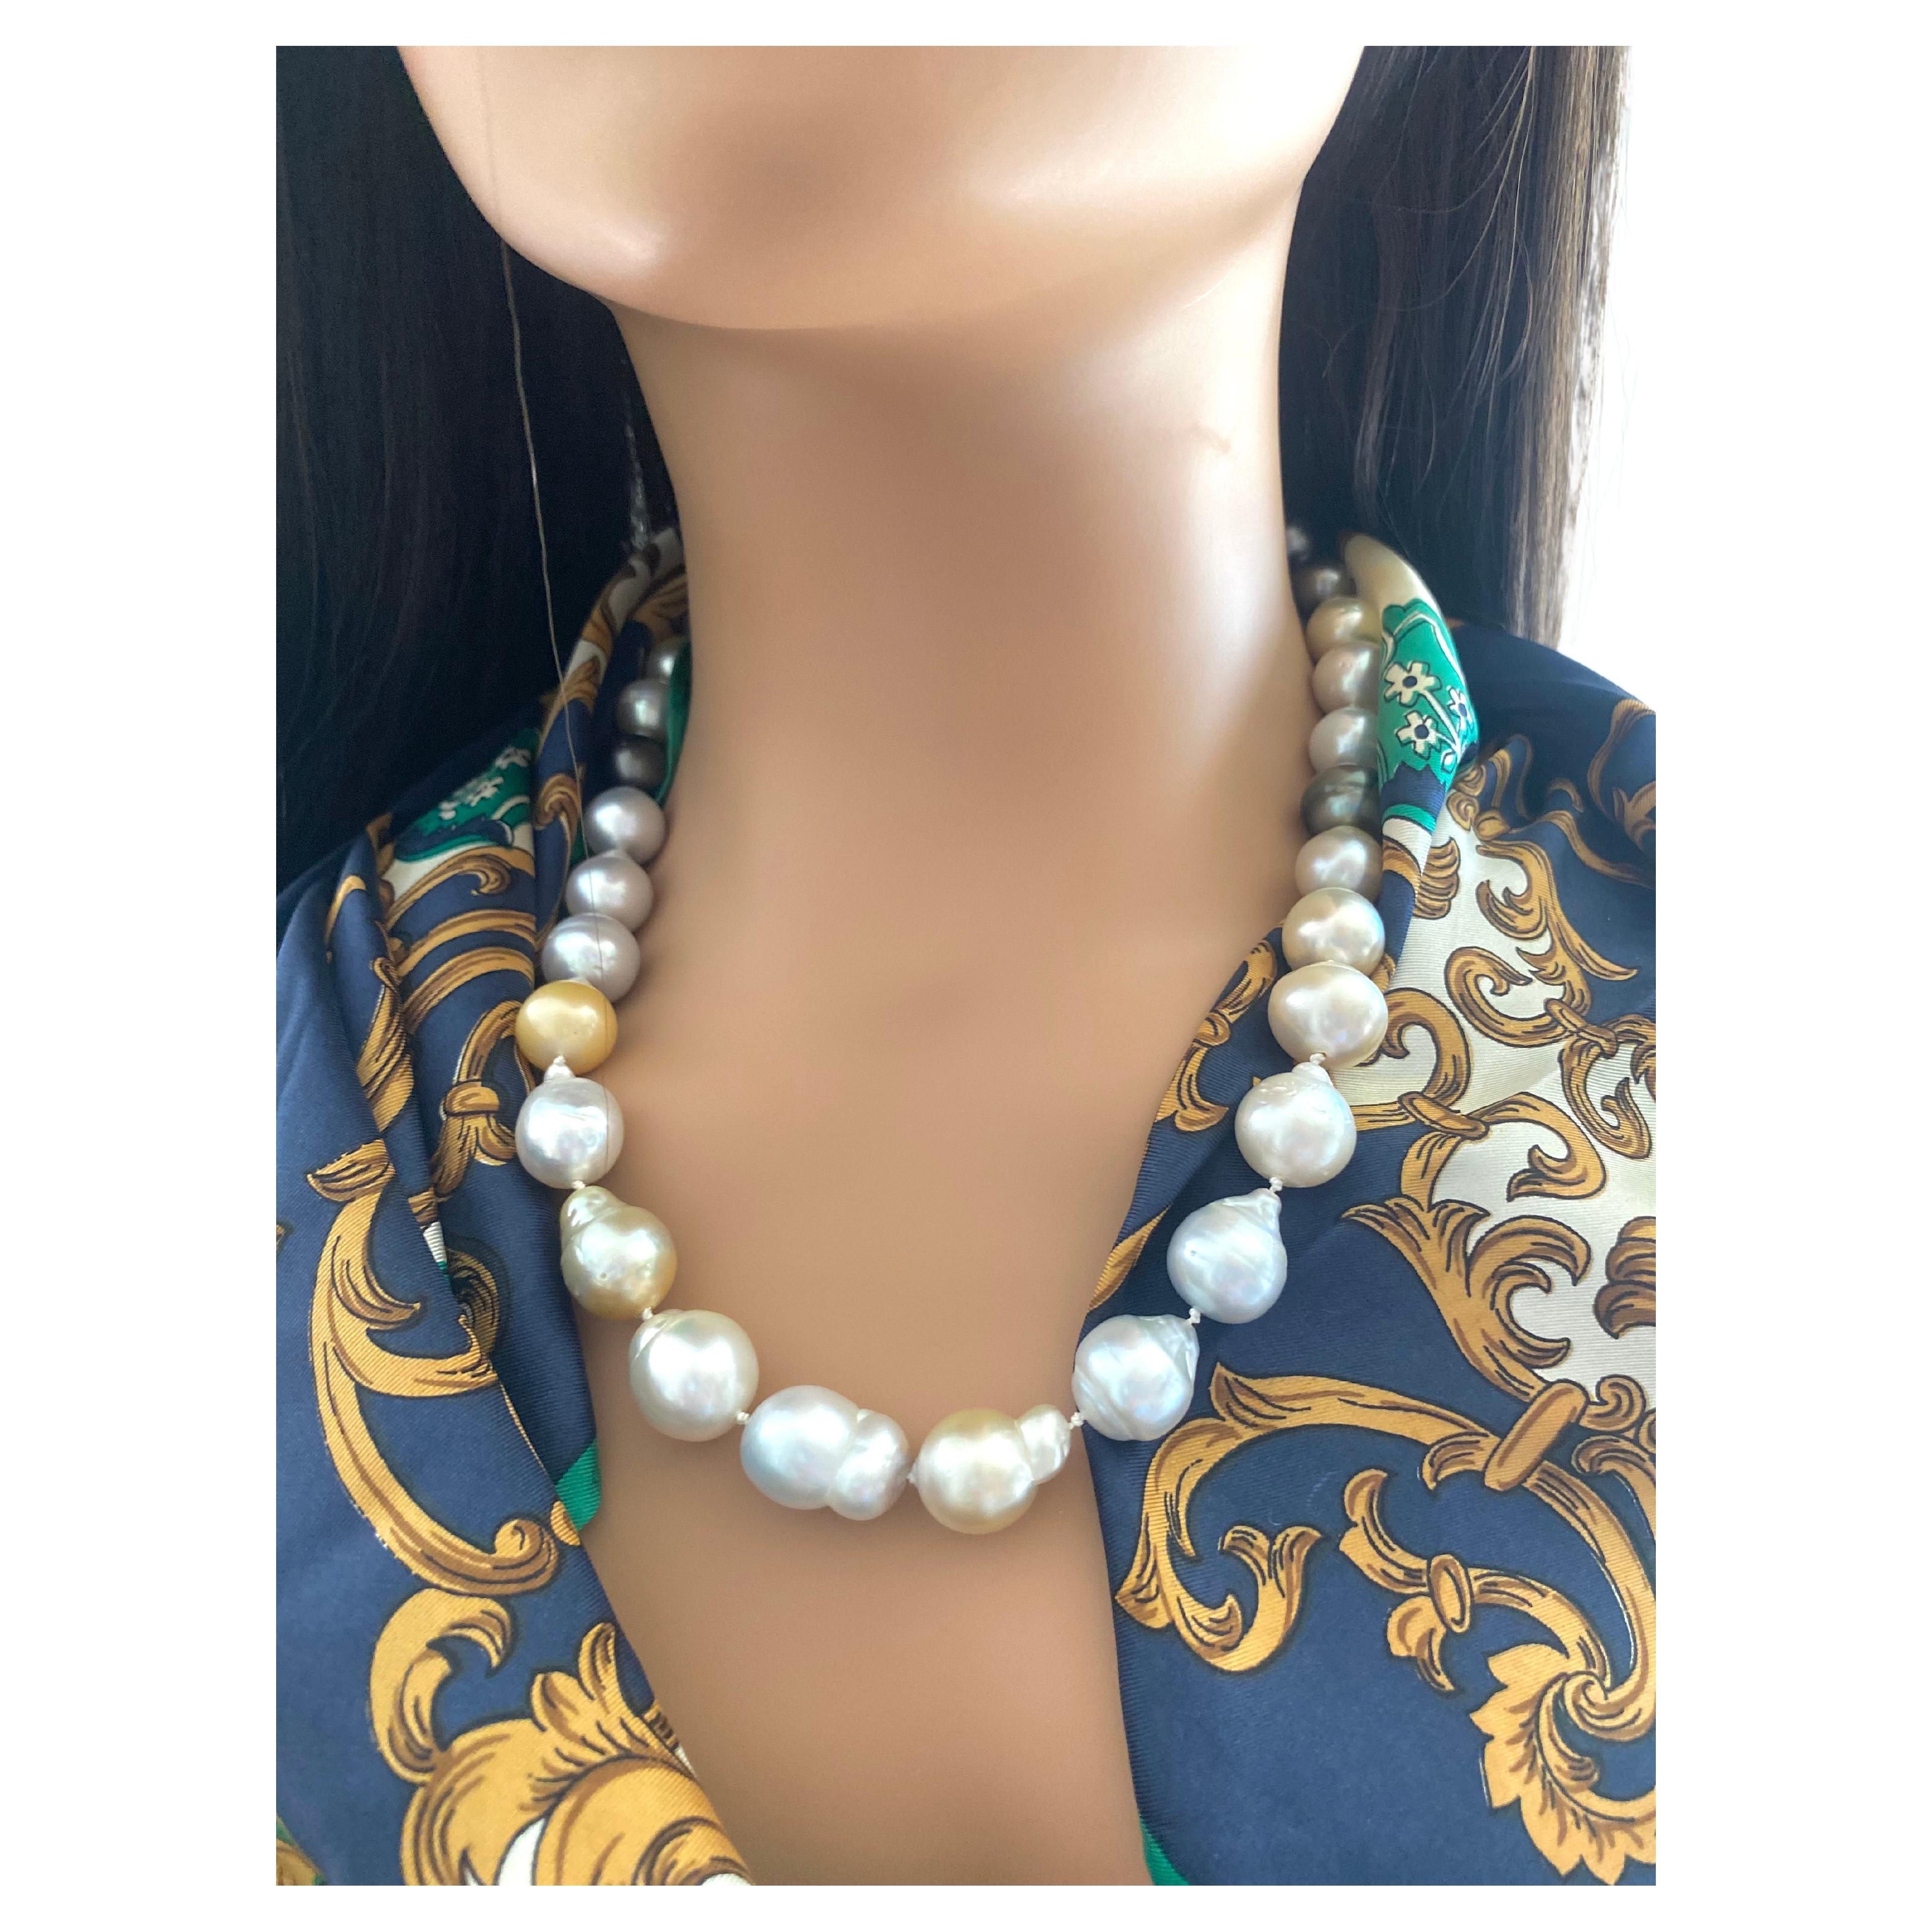 
Estate Stunning Multicolor grey, silver, cream, and white undyed South Sea Baroque Pearls Necklace. 
30 baroque pearls, each pearl is unique. The necklace is finished with a round 14k yellow gold ball clasp. The stunning necklace is 20 inches long.